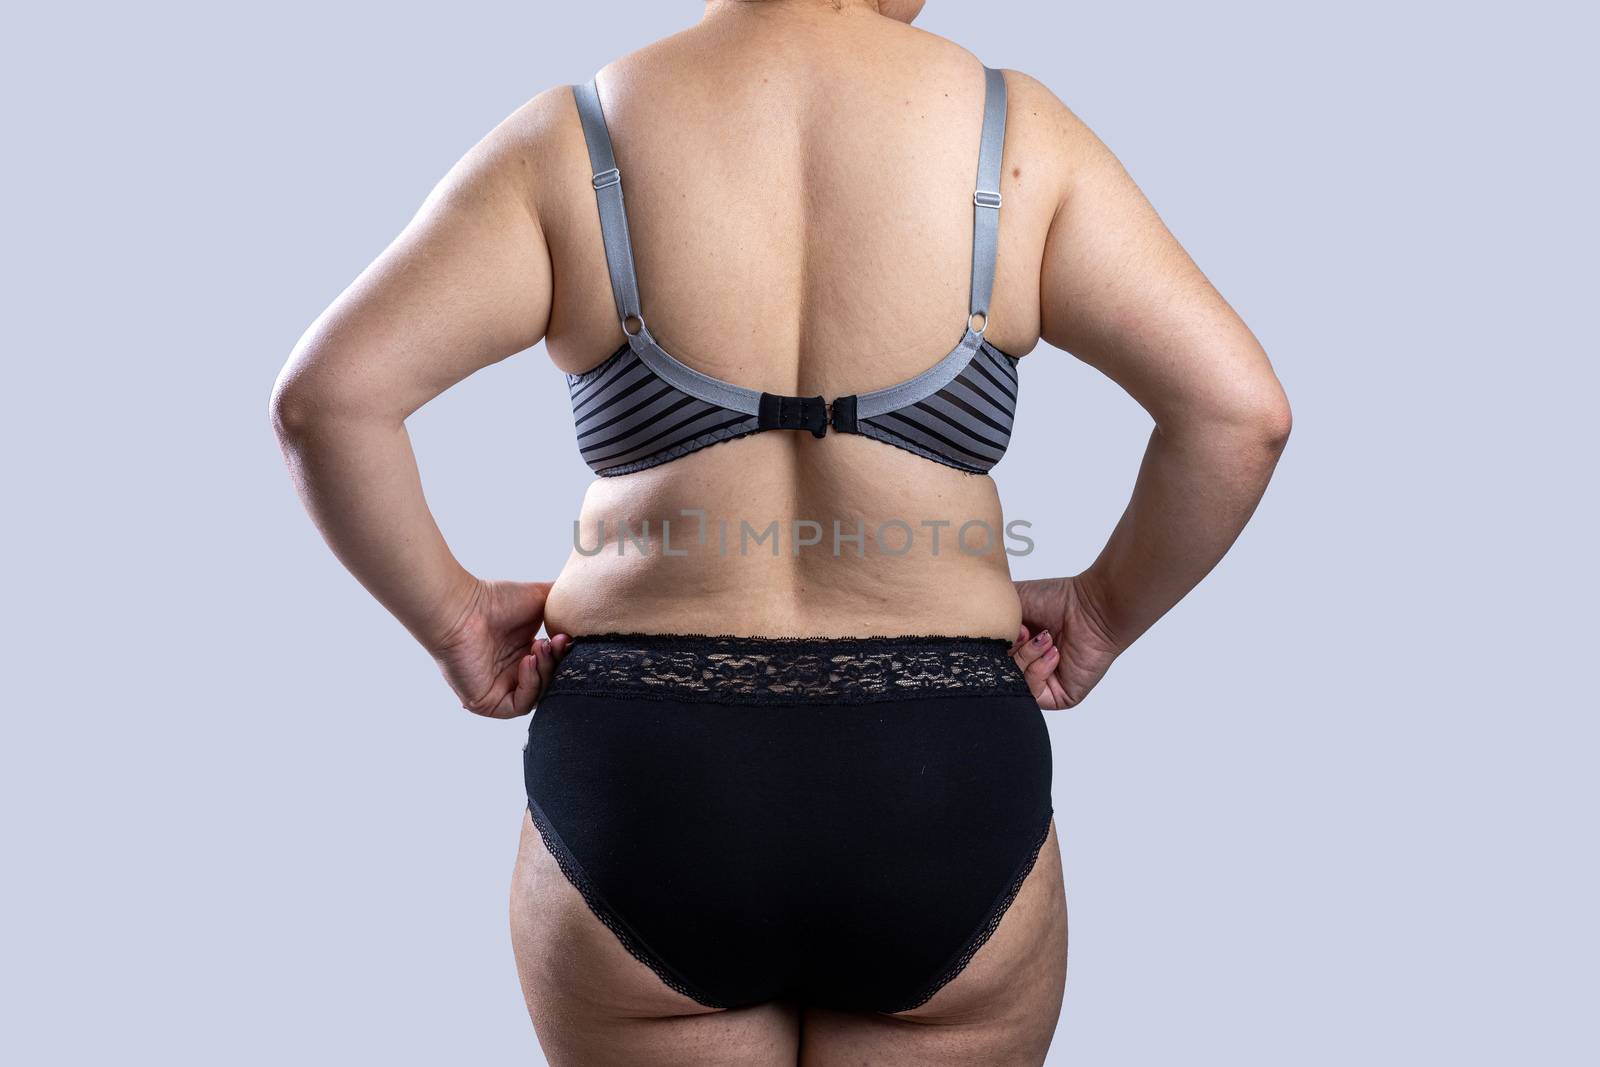 Woman Real Body Plus size Model in lingerie posign, imperfect nonideal